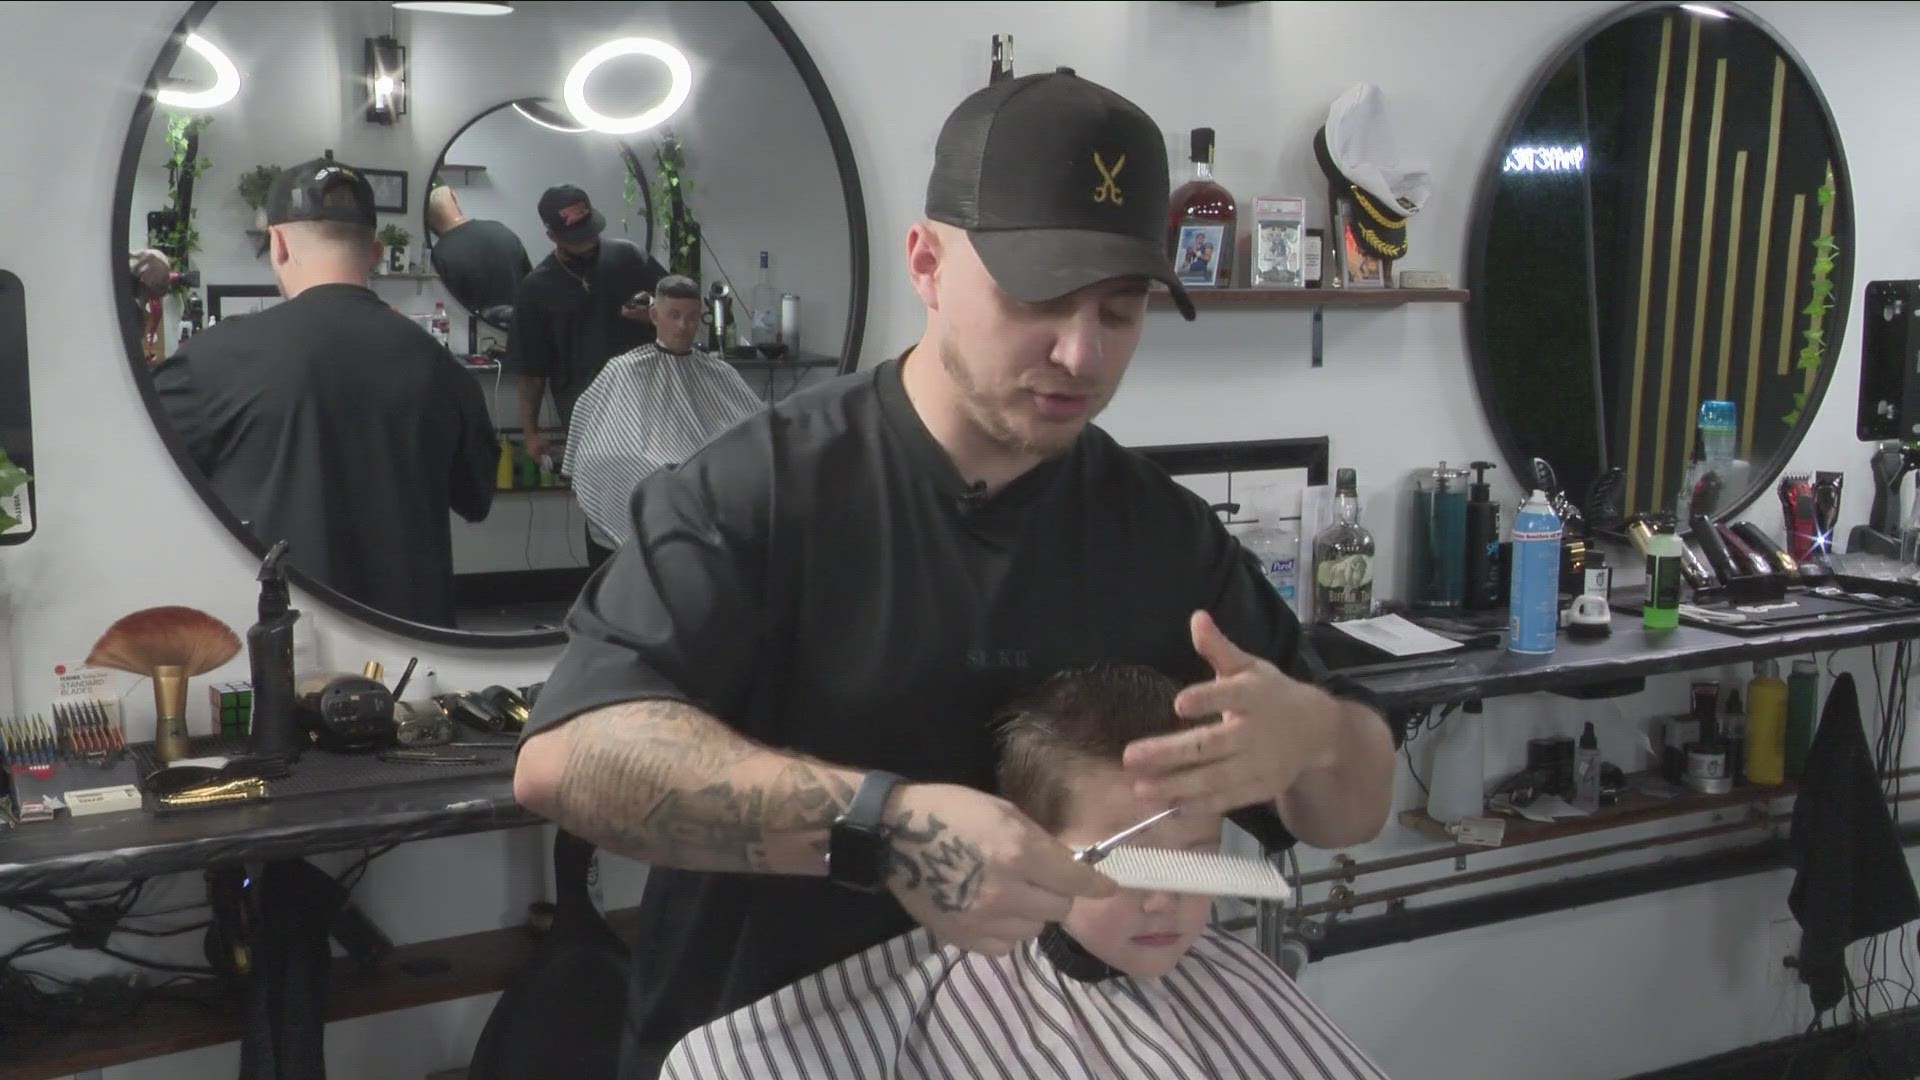 Buffalo barber nominated for overall best men's cut